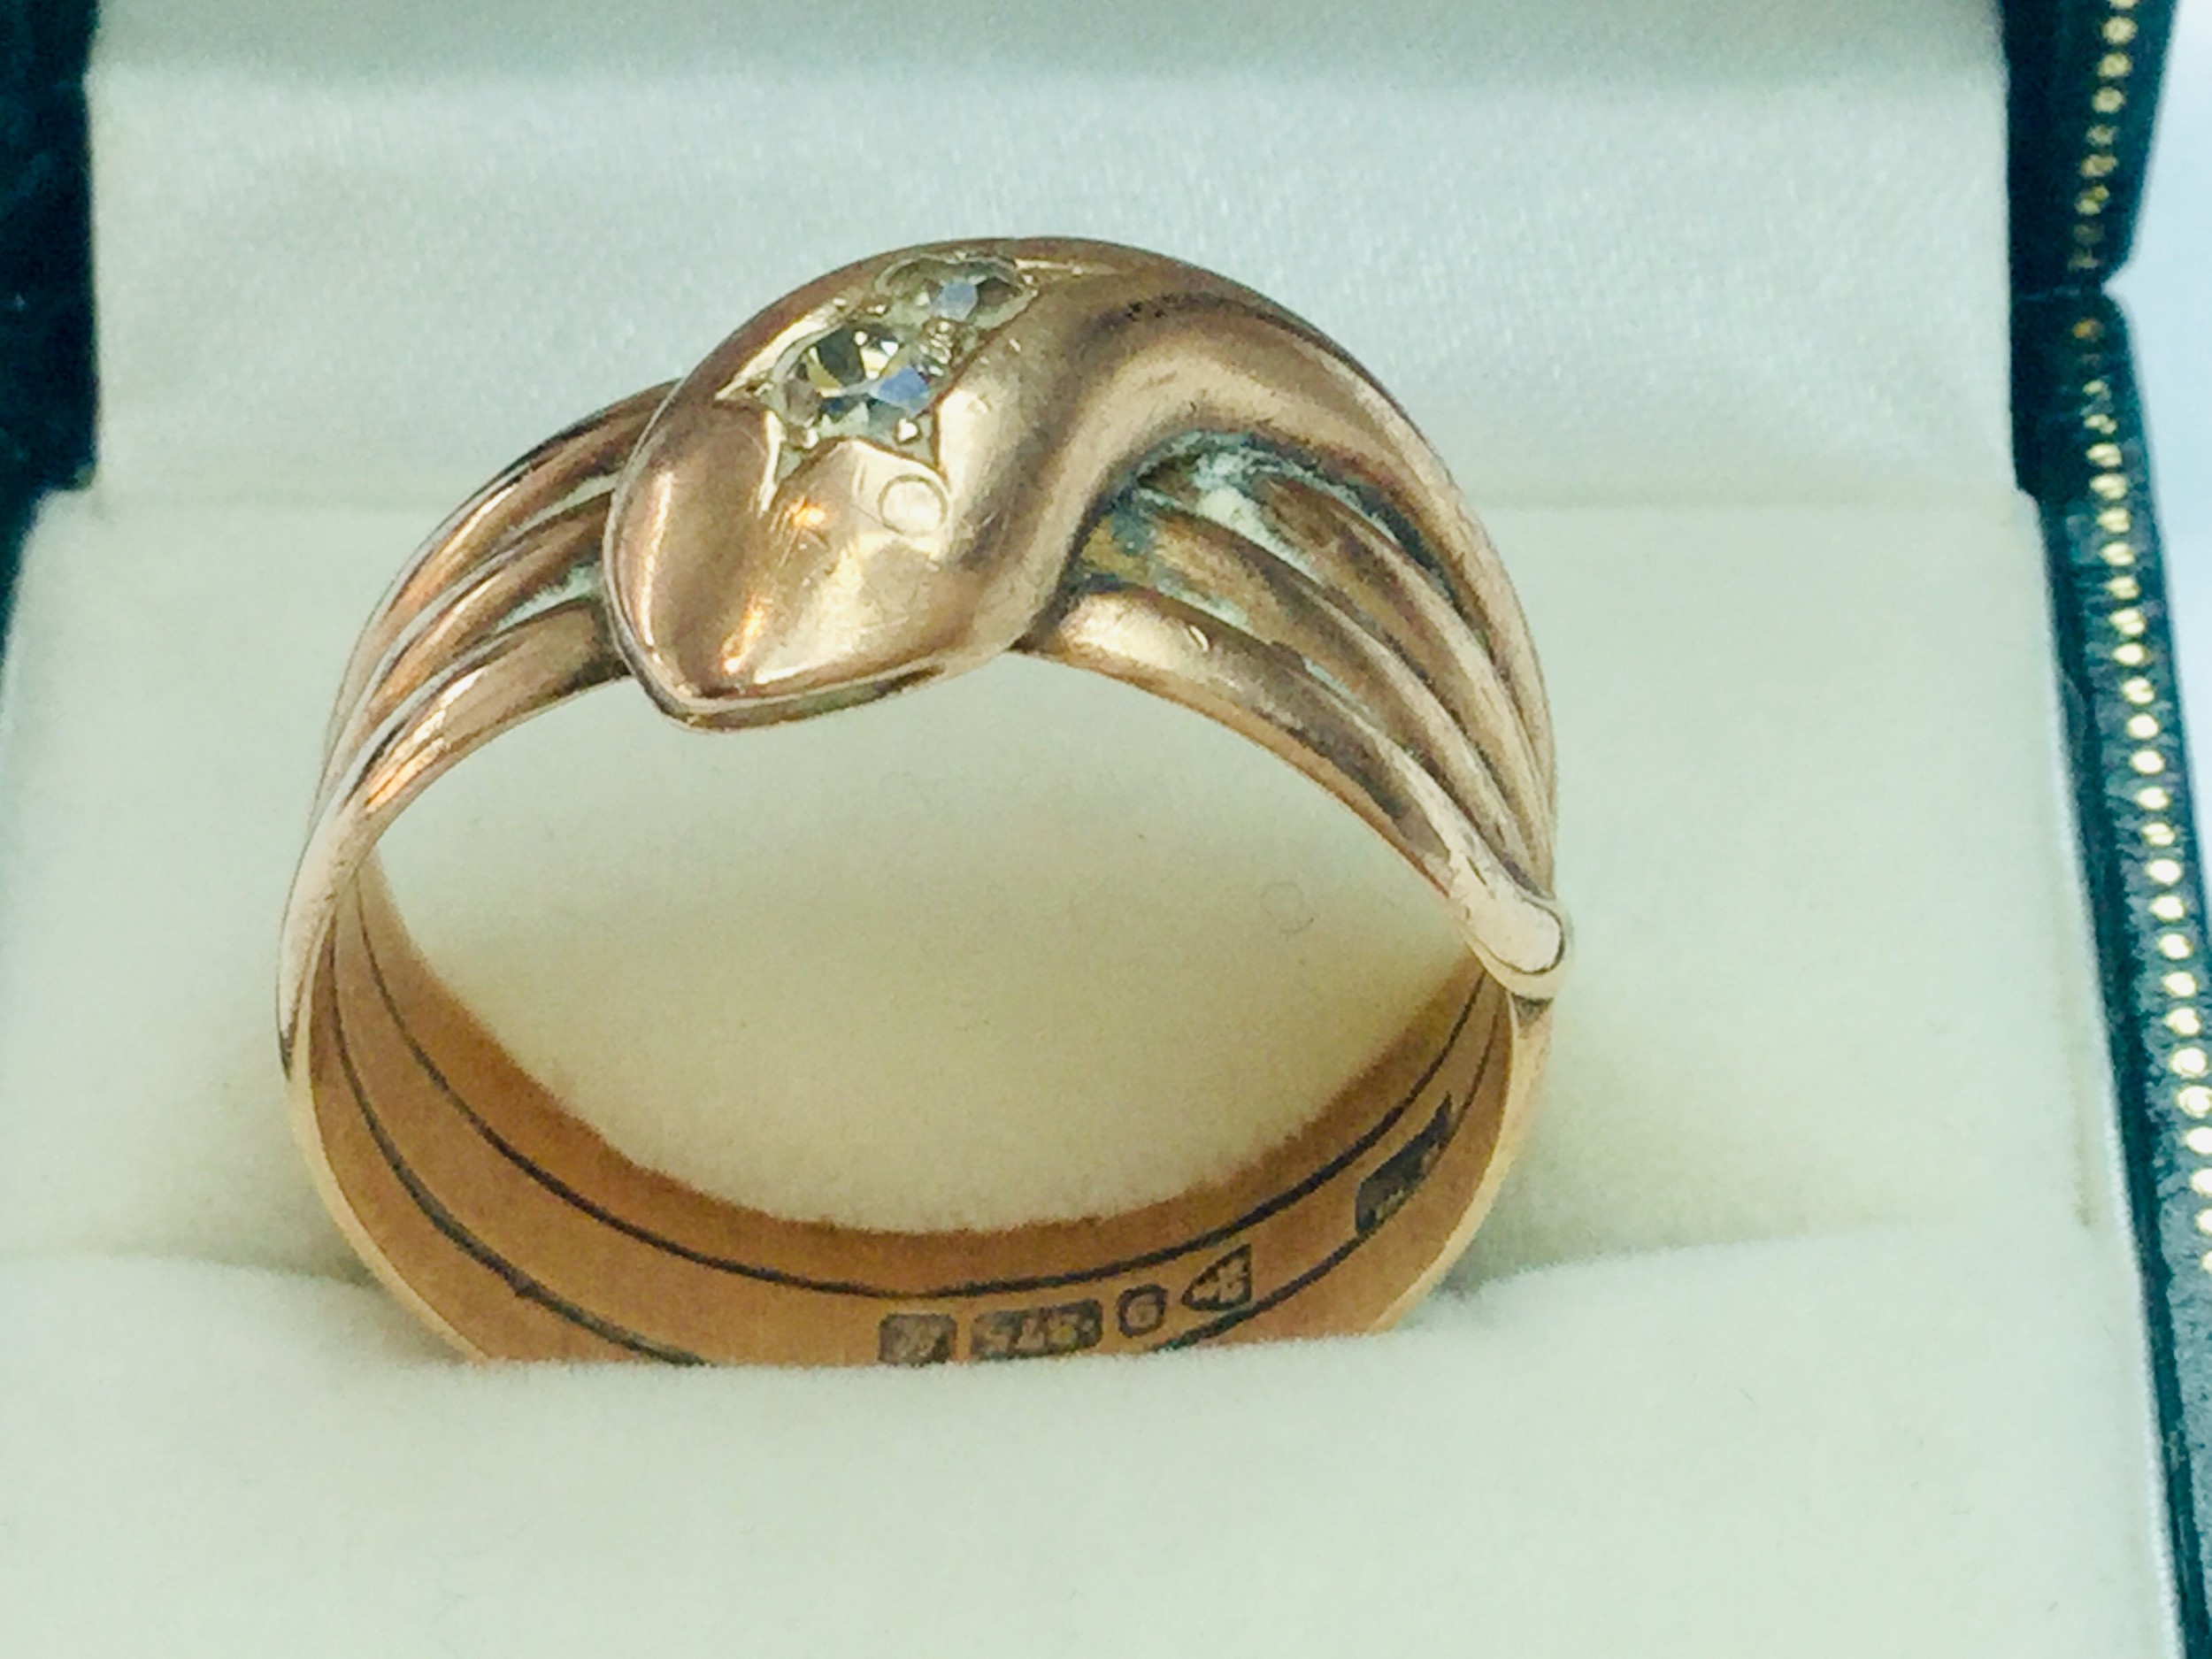 A gents 9ct gold dress ring shaped as a snake with rose cut diamonds for eyes, finger size W,